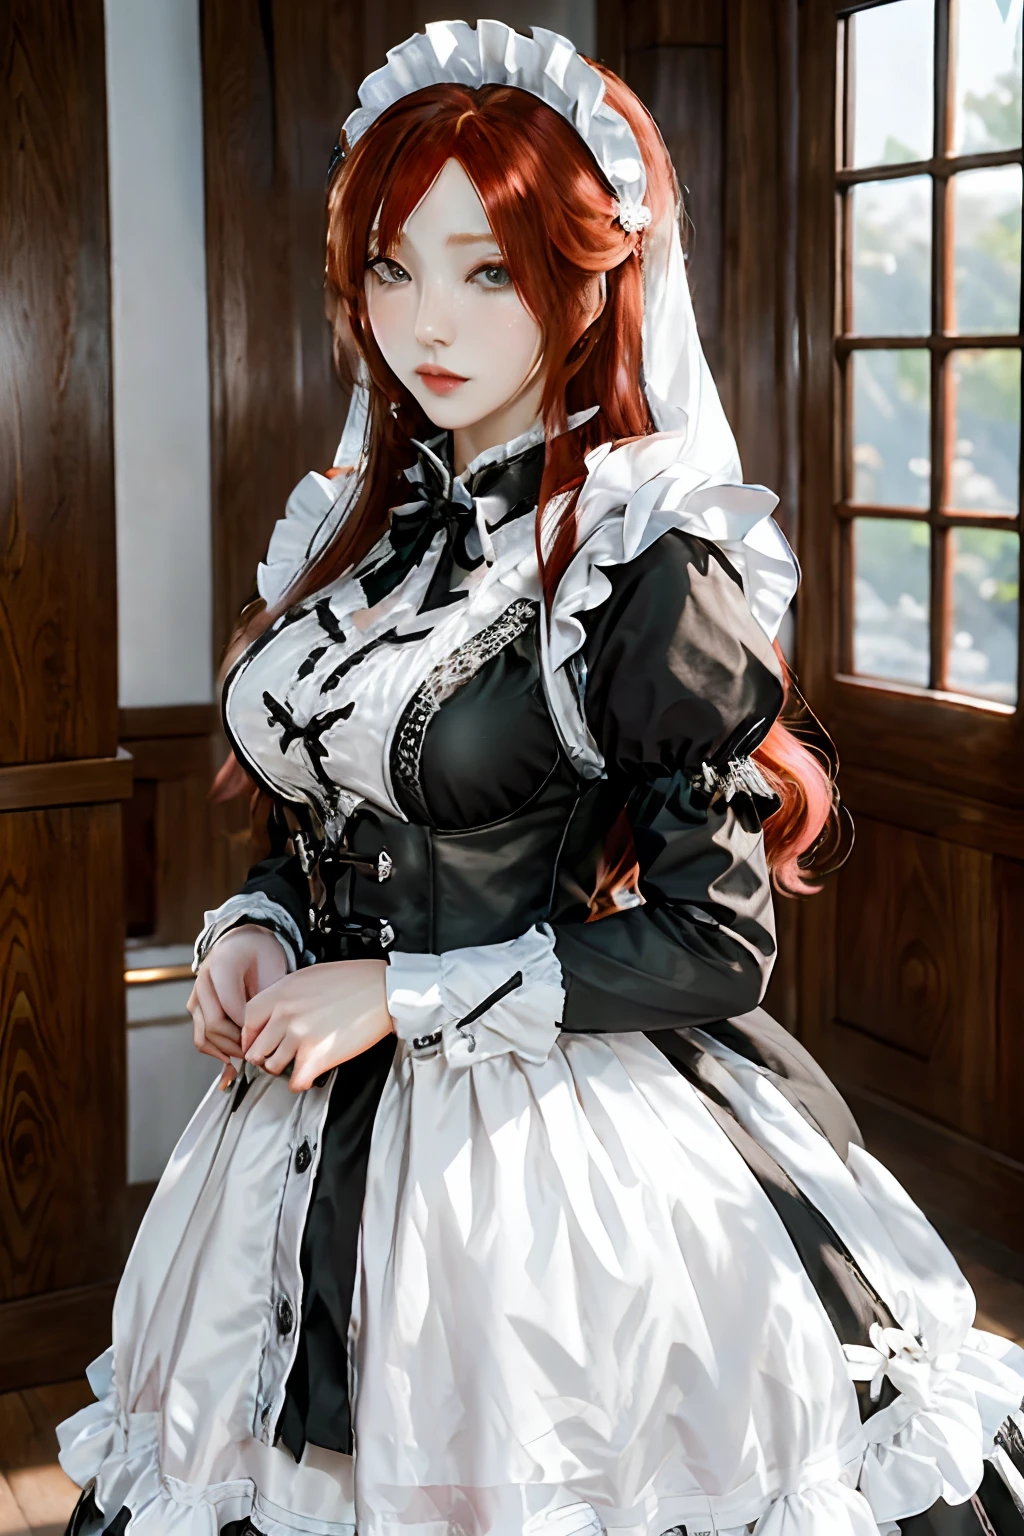 The woman, (European Citizenship: 1.2) In a black and white outfit posing for a photo, maiden! Dress, Anime Girl Cosplay, anime girl in a maid costume, The Magnificent Maiden, maid outfit, cosplay photo, cosplay, anime cosplay, A Few Cute Poses, (Face of the Goddess), (Elegant posture: 1.4), Elegant atmosphere, Noble atmosphere, (Milf: 1.6) (redhead hair: 1.5), (Cyan eyes: 1.4), (maidservant: 1.4), (Black and White Maid Outfit: 1.1), (Incredible beauty, High facial detail:1.3),